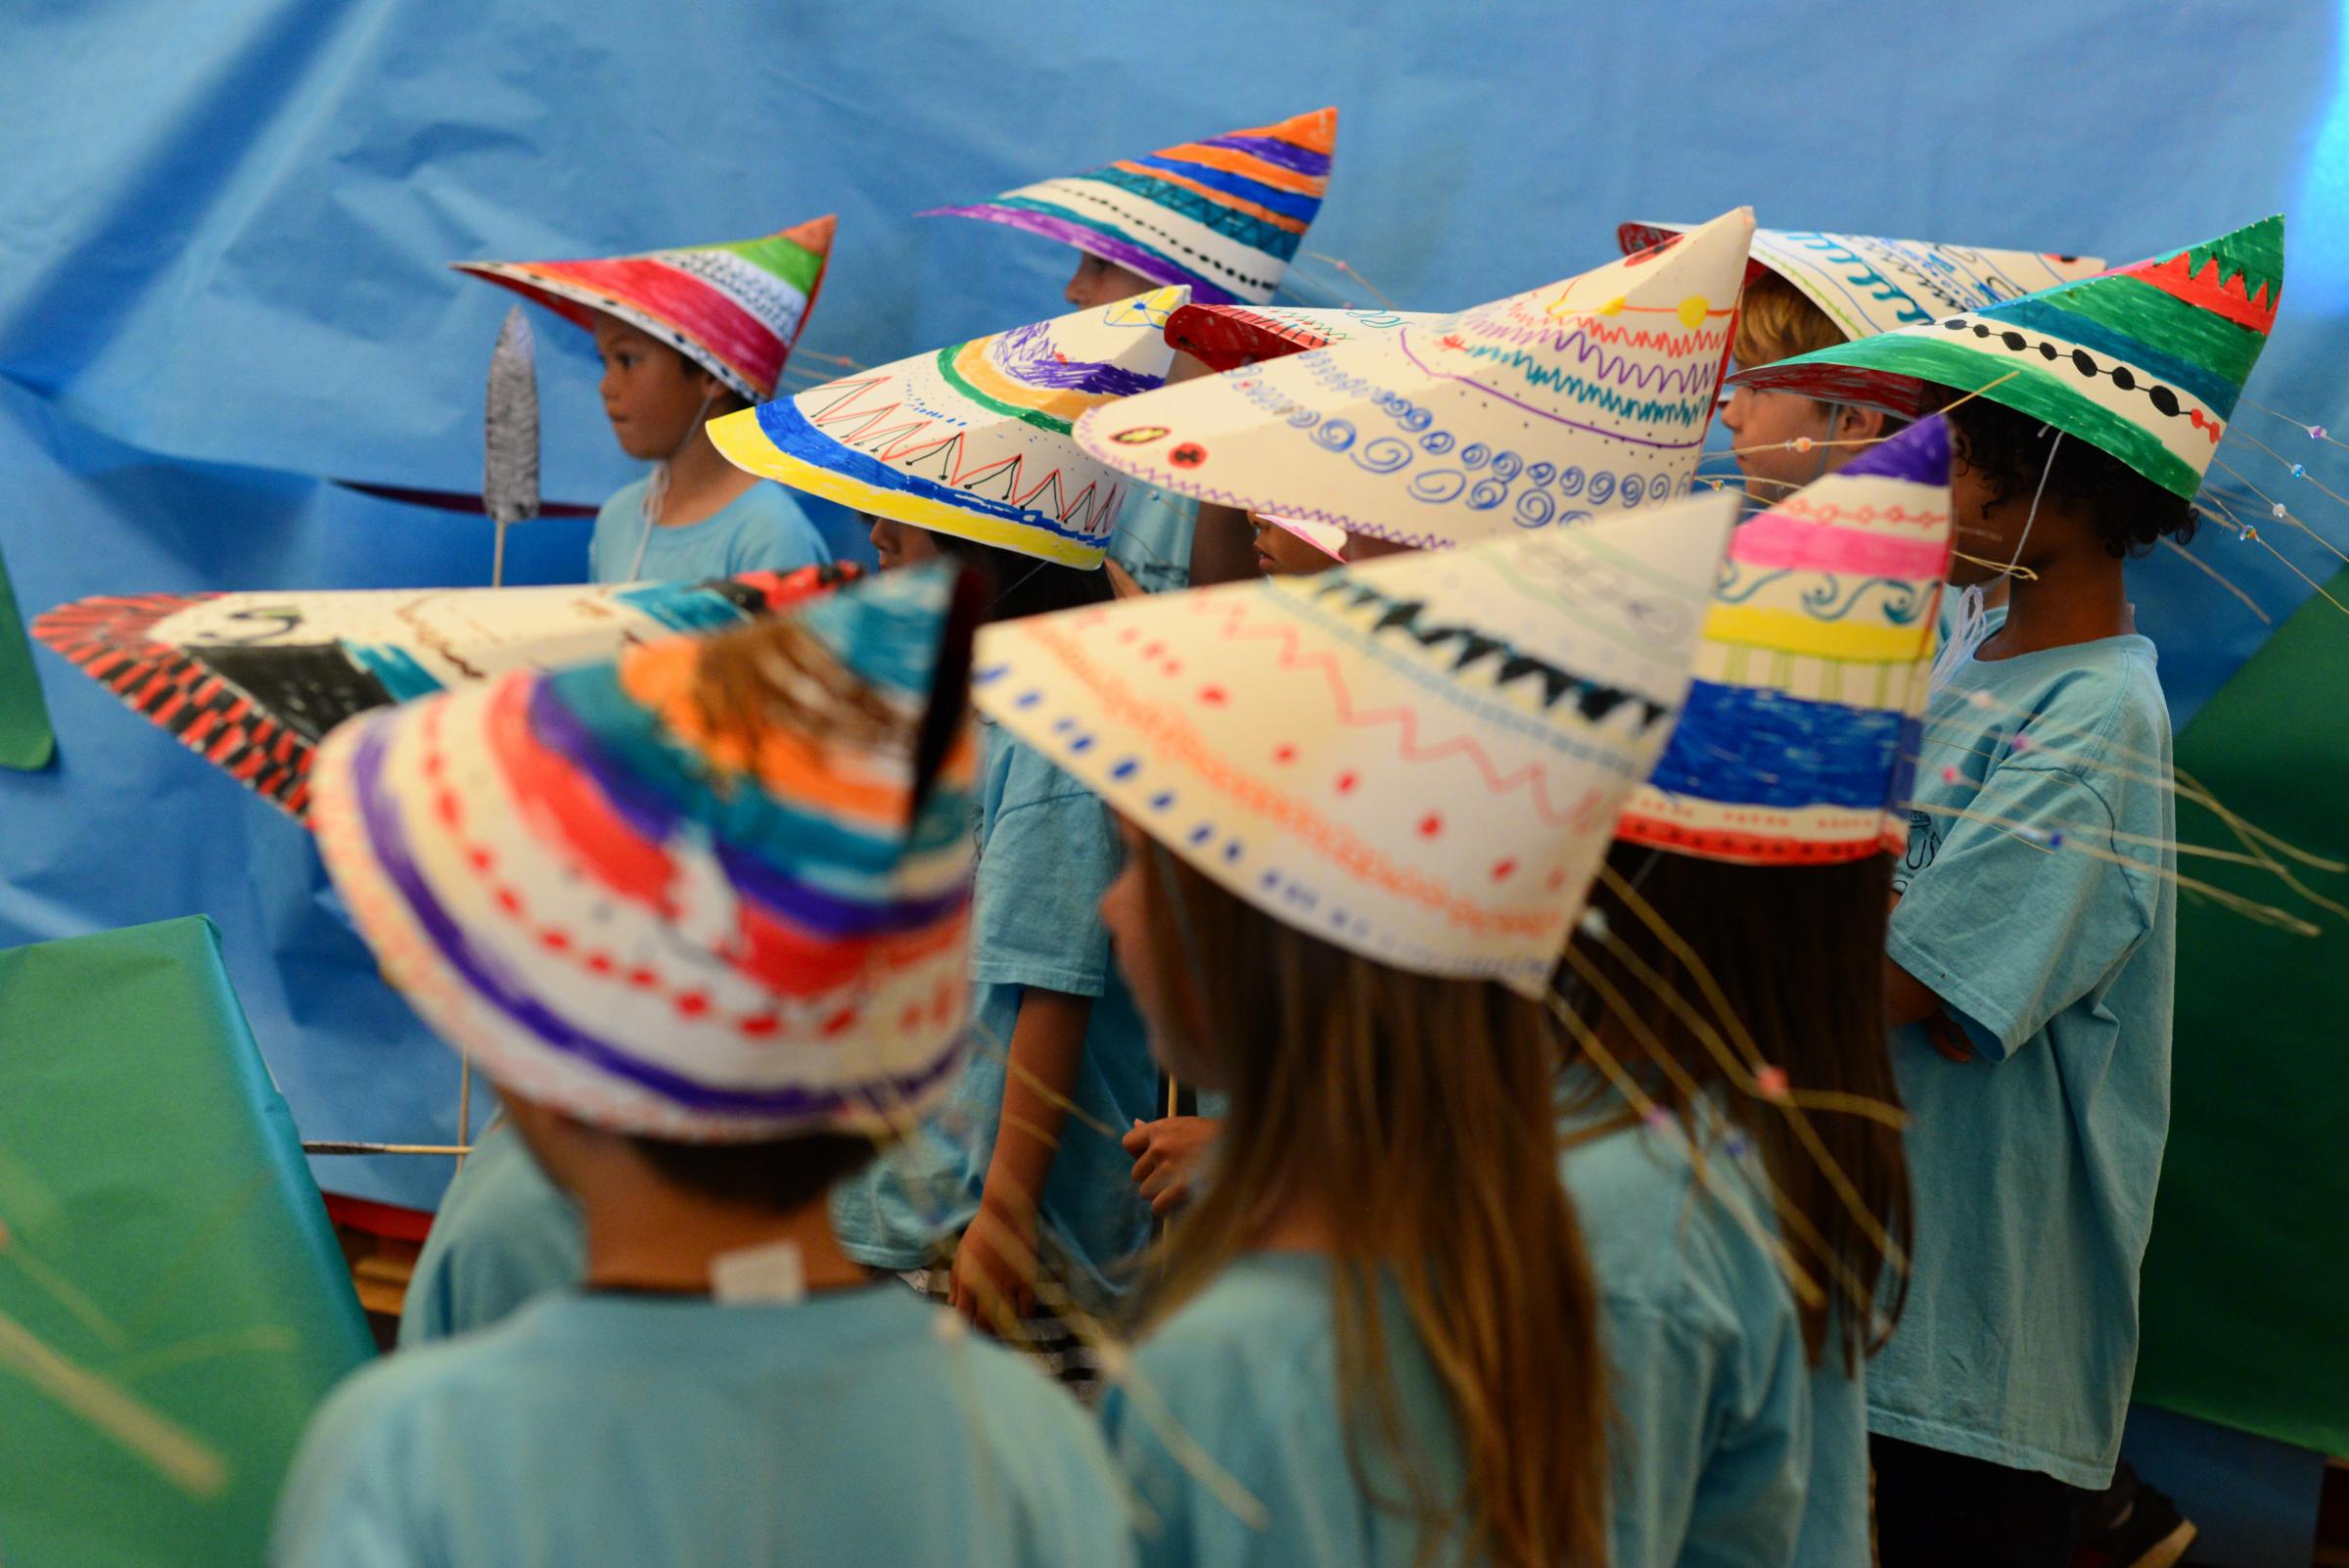 Campers decorated their own bentwood hats based on traditional Unangan designs. (Photo by Berett Wilber/KUCB)